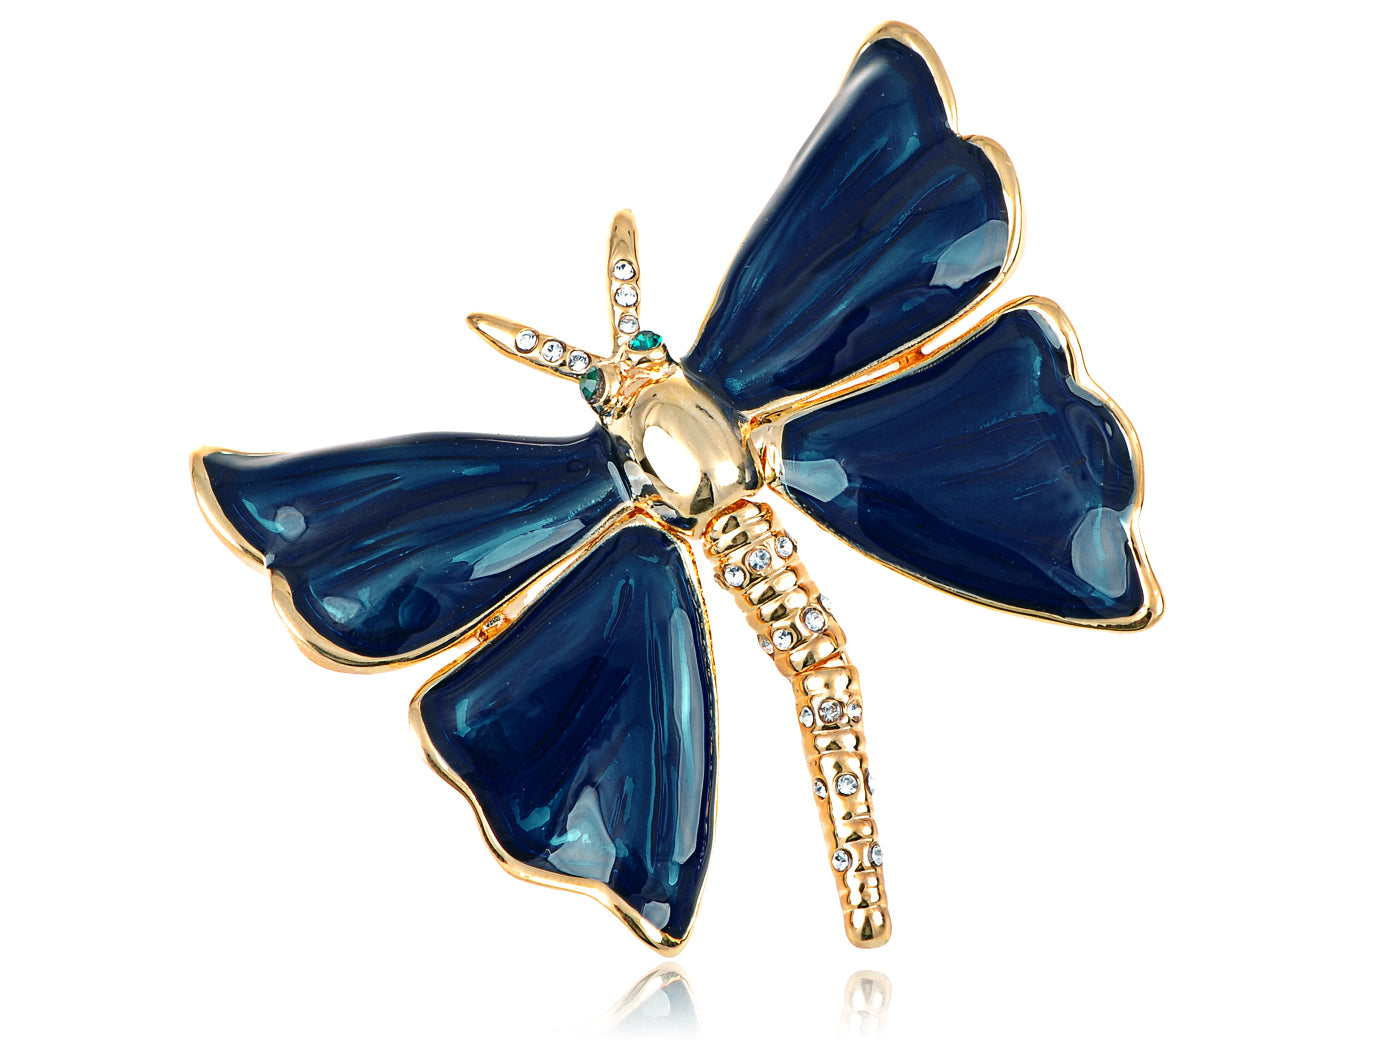 Elements Pearlescent Royal Blue Painted Dragonfly Pin Brooch